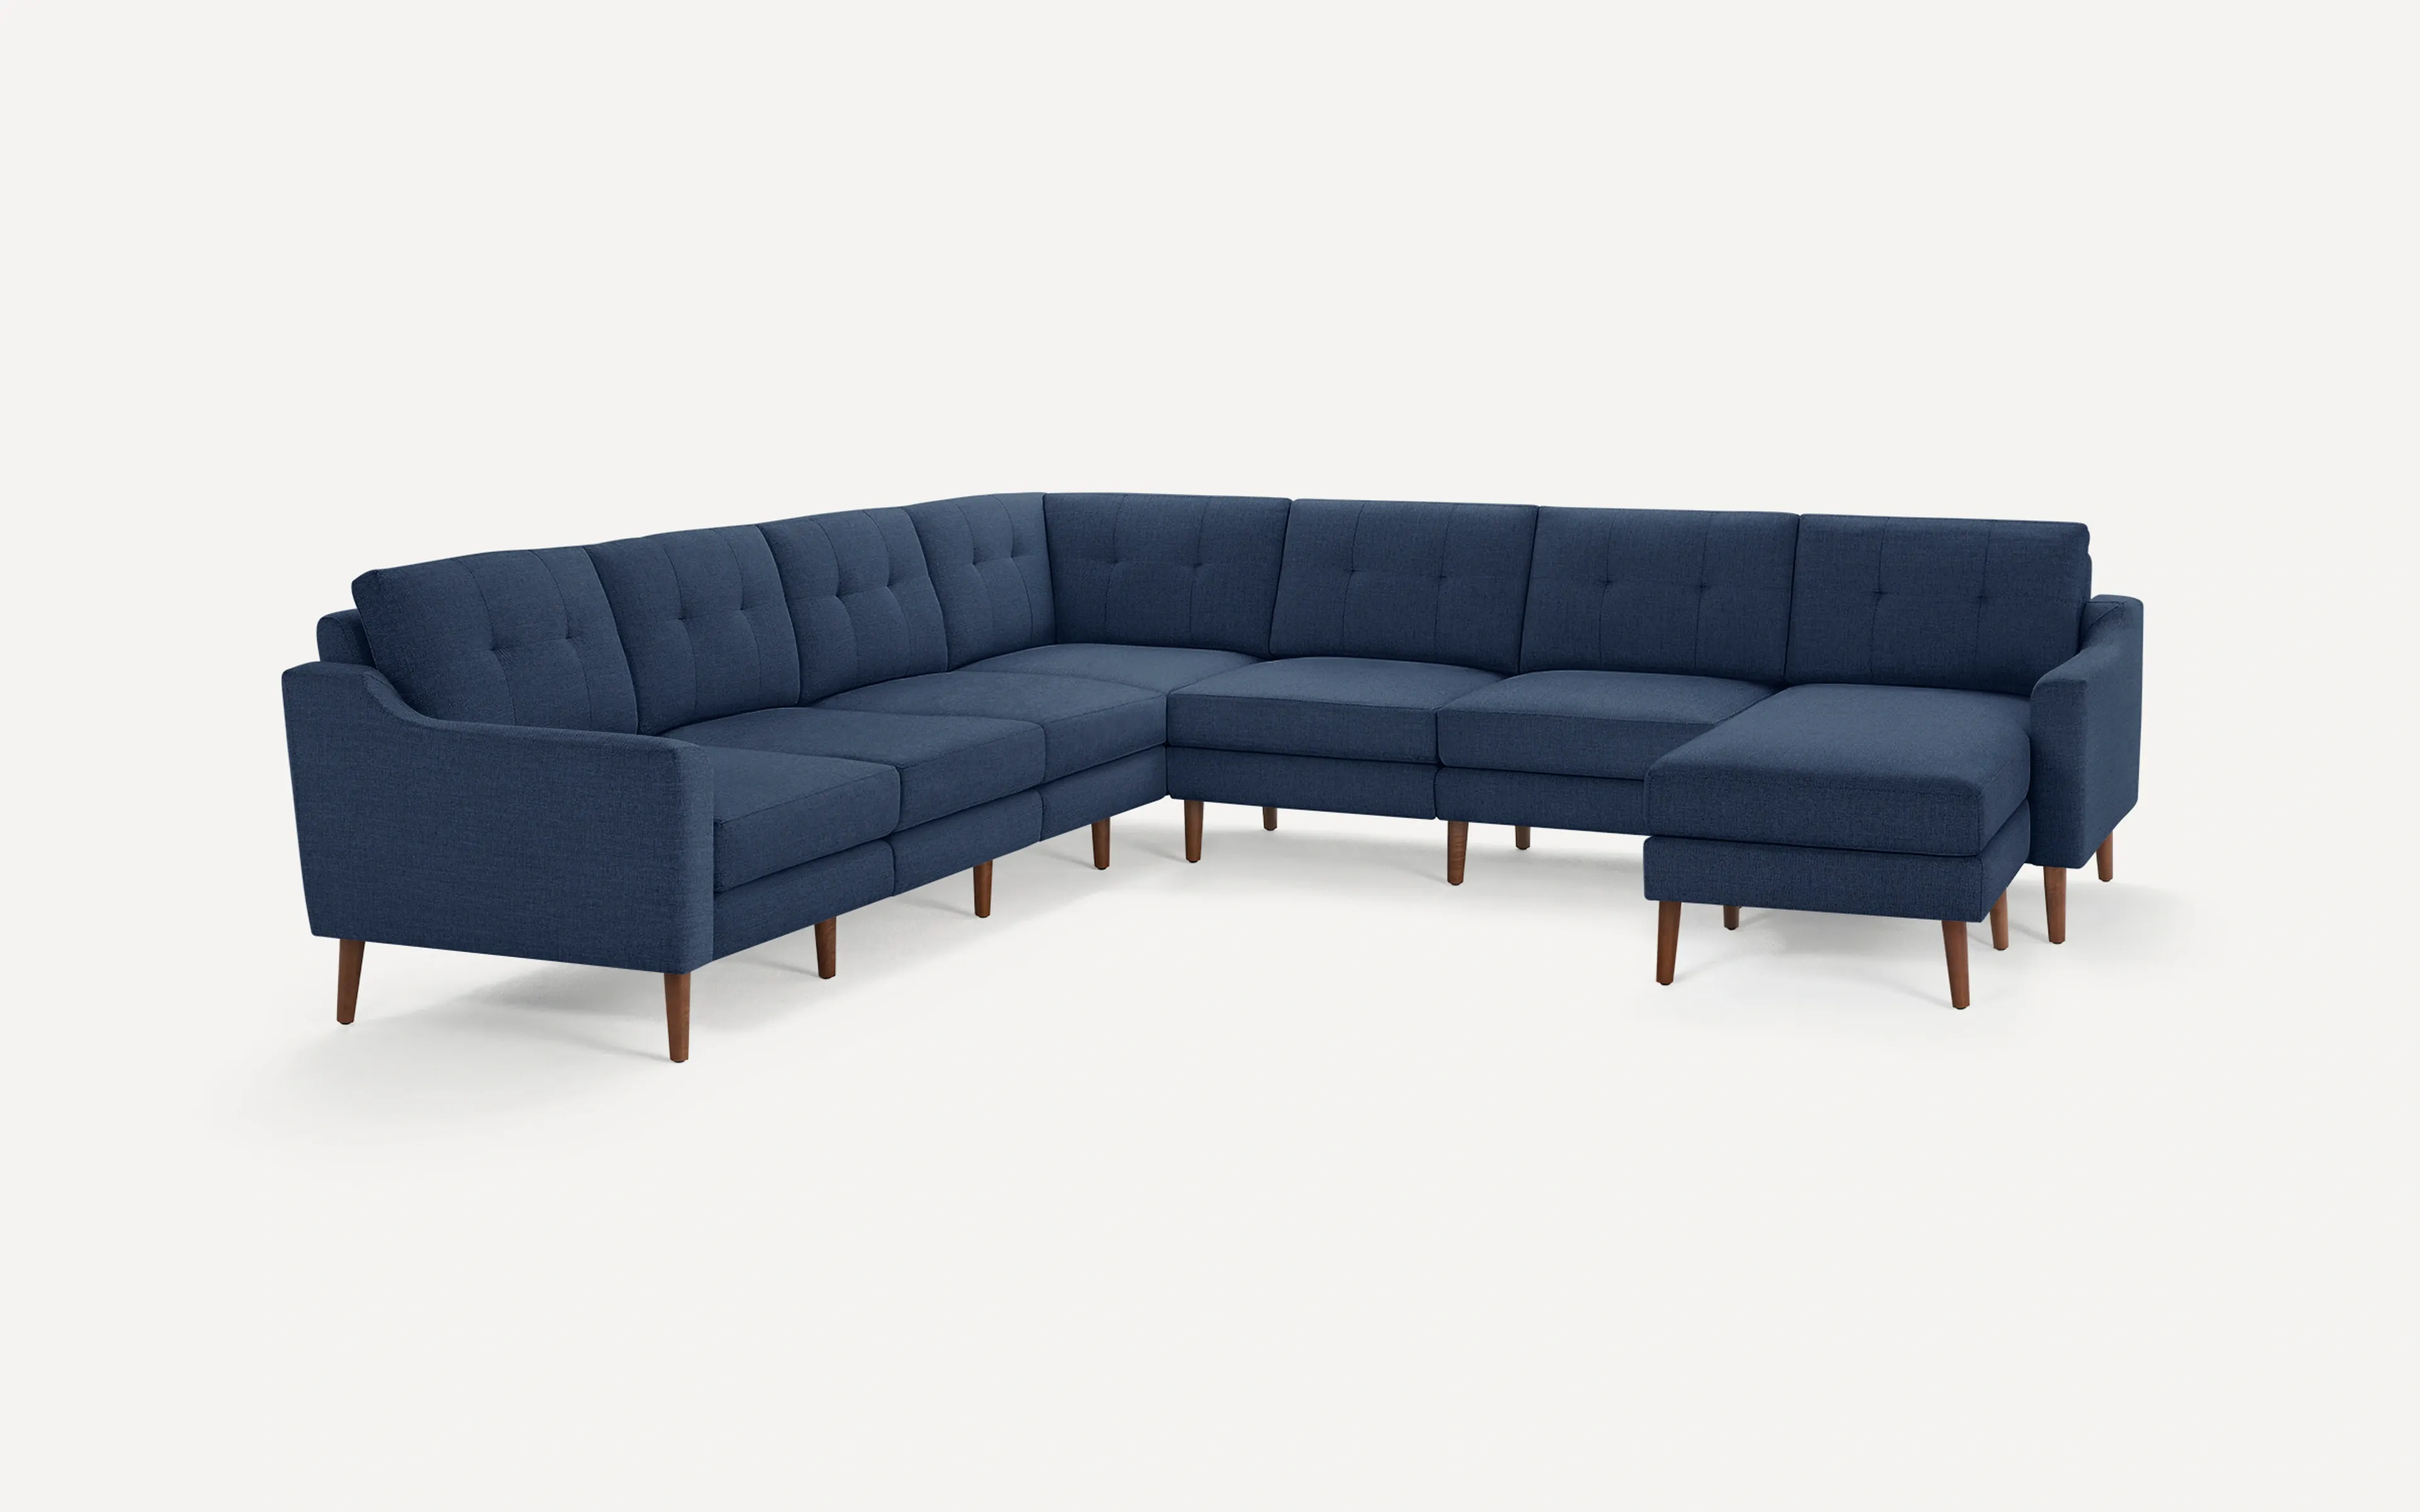 Slope Nomad 7-Seat Corner Sectional with Chaise